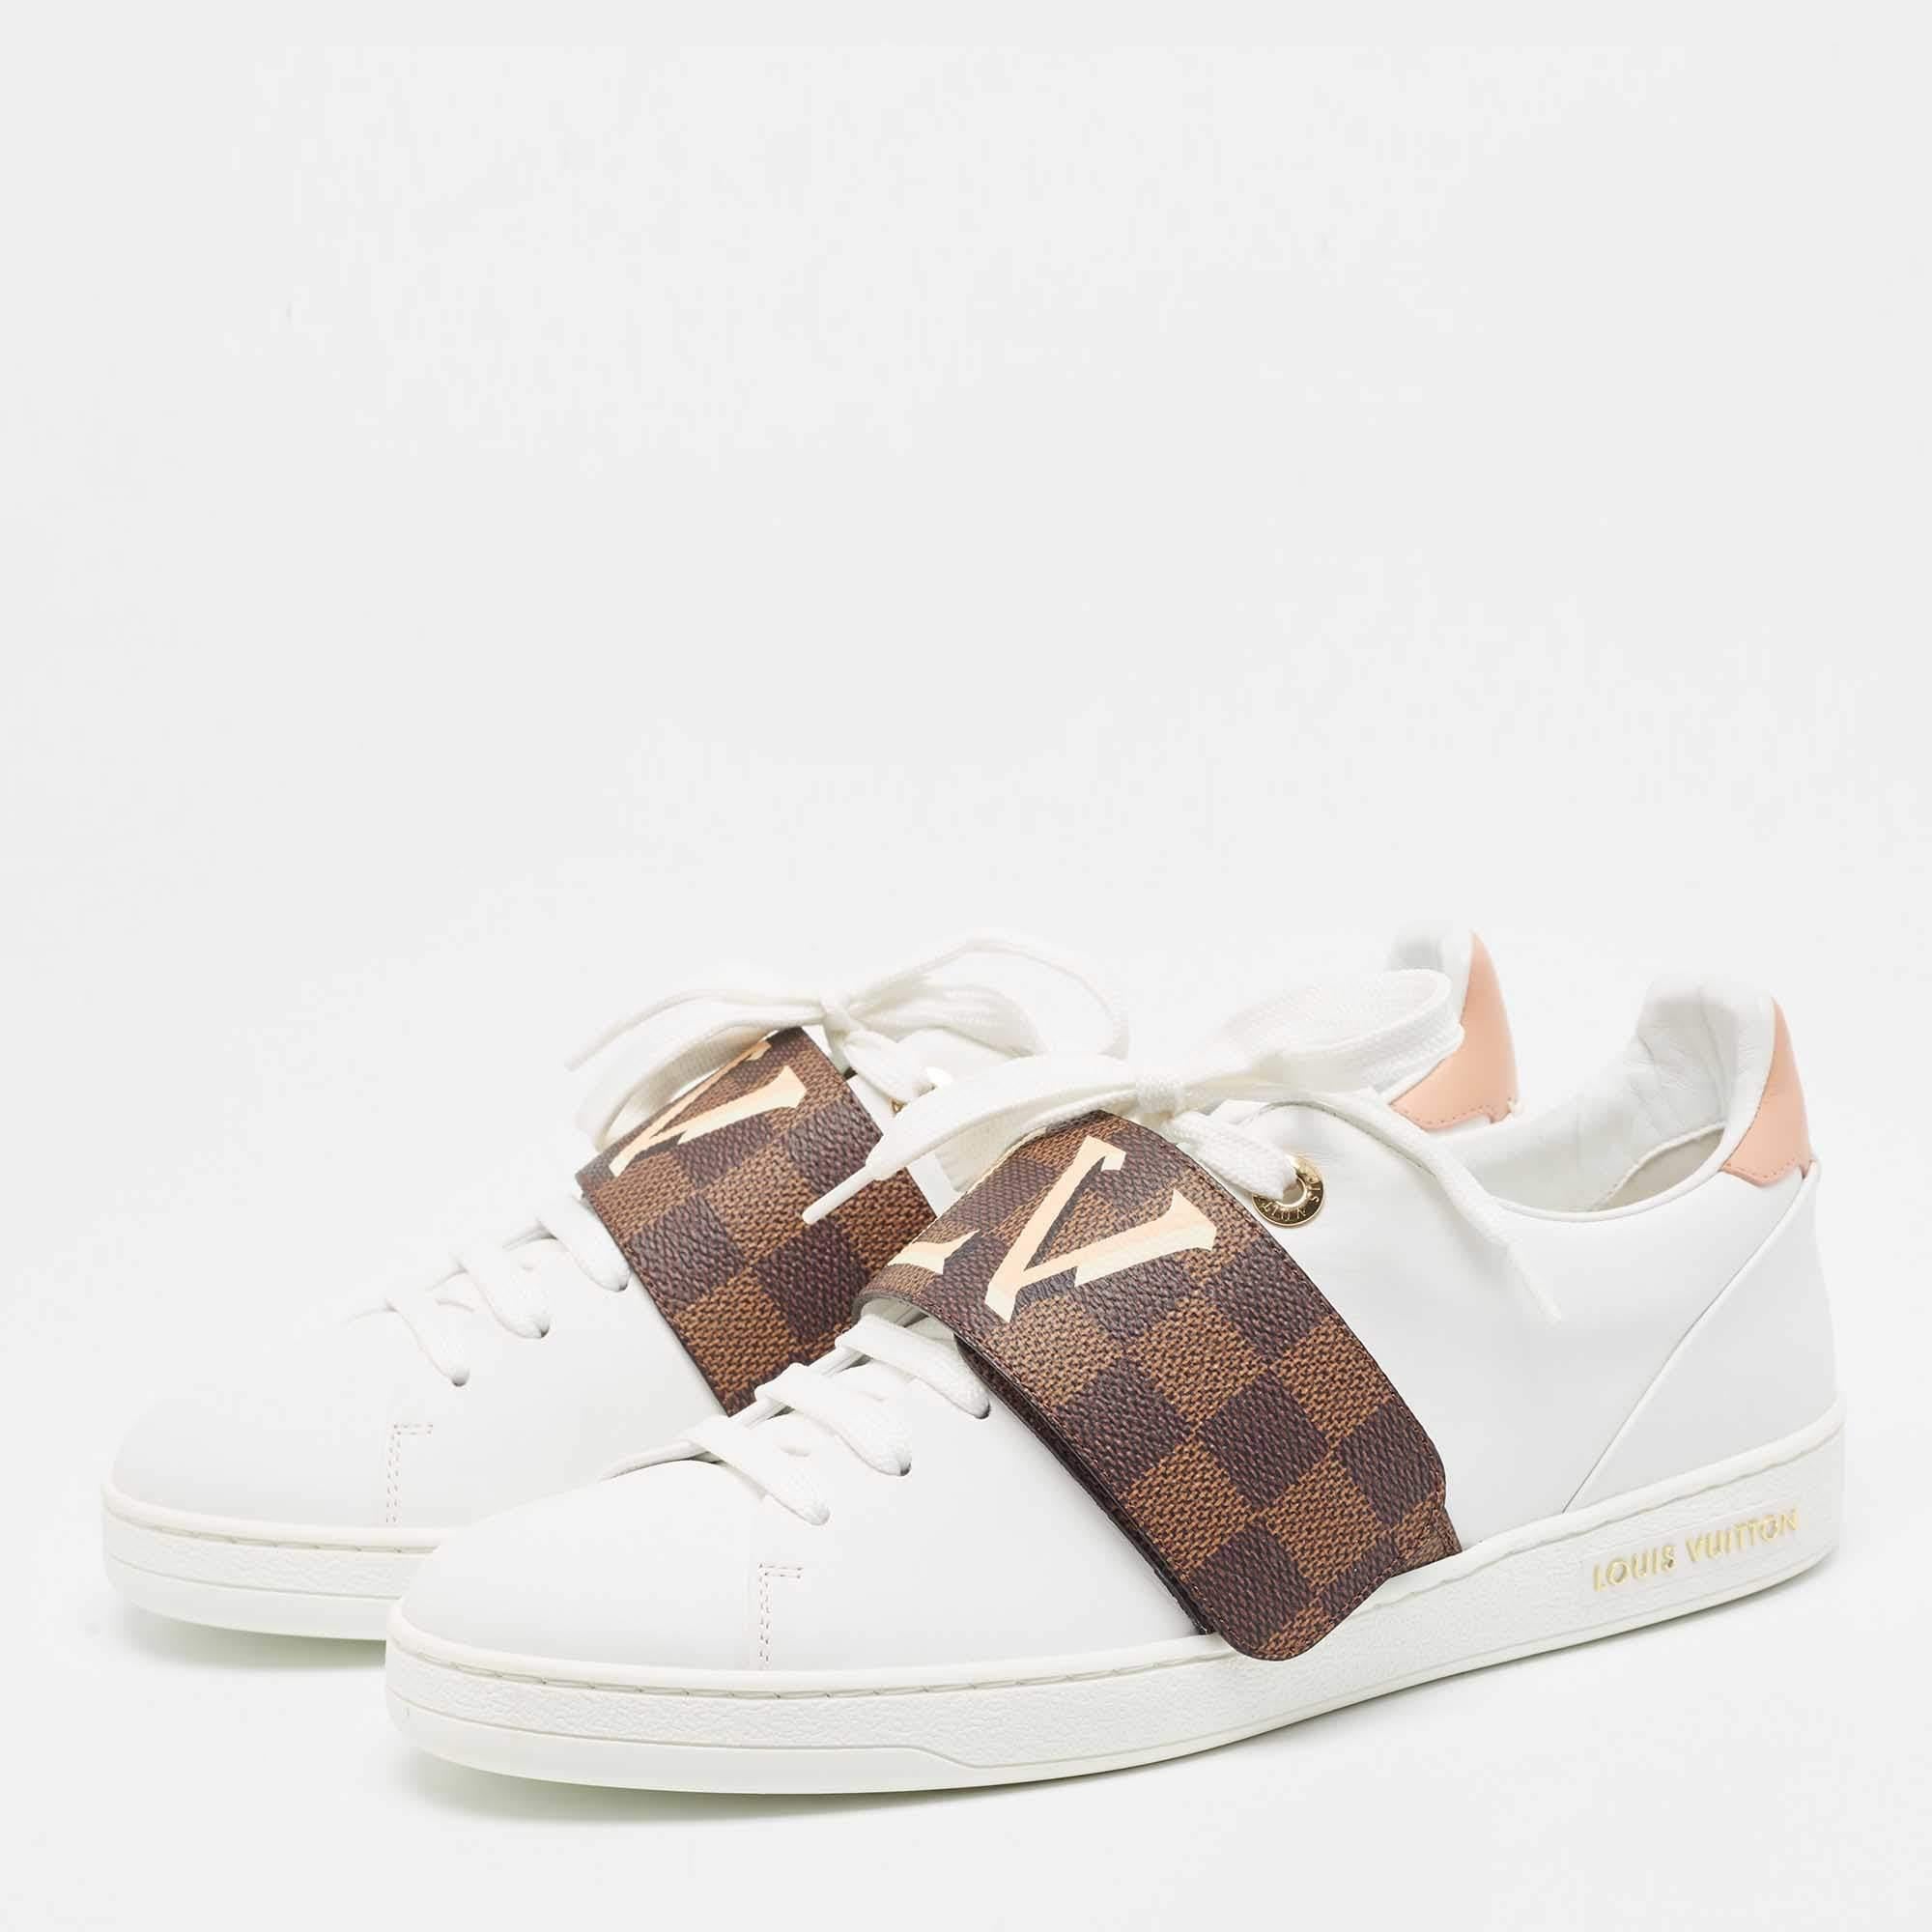 Women's Louis Vuitton White/Monogram Canvas and Leather Frontrow Sneakers Size 40